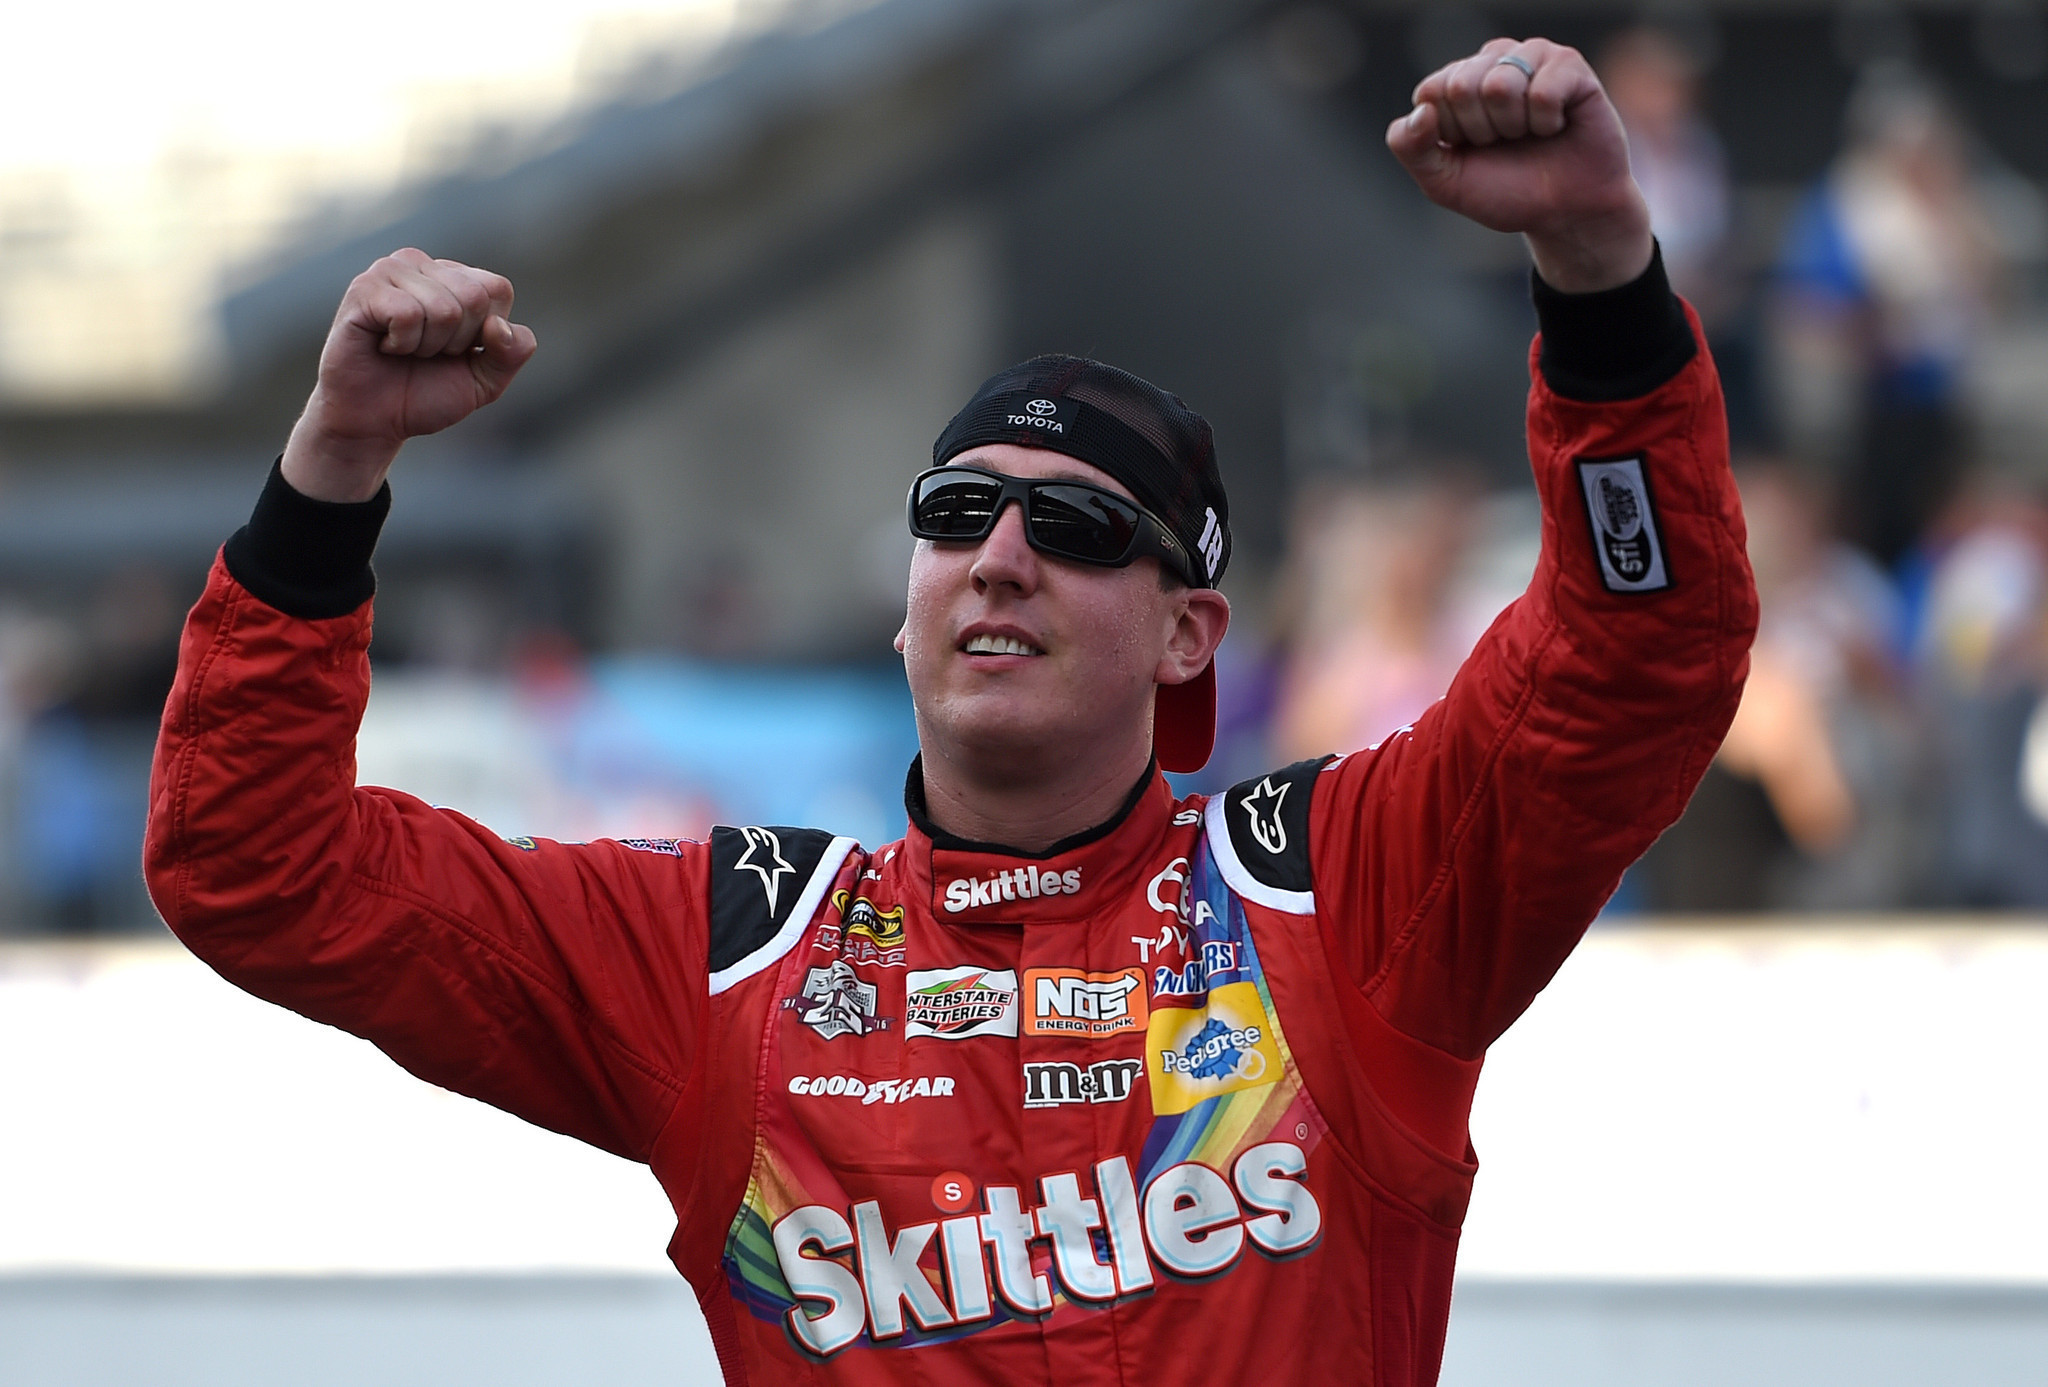 Kyle Busch making record run at another Cup title - Orlando Sentinel2048 x 1387